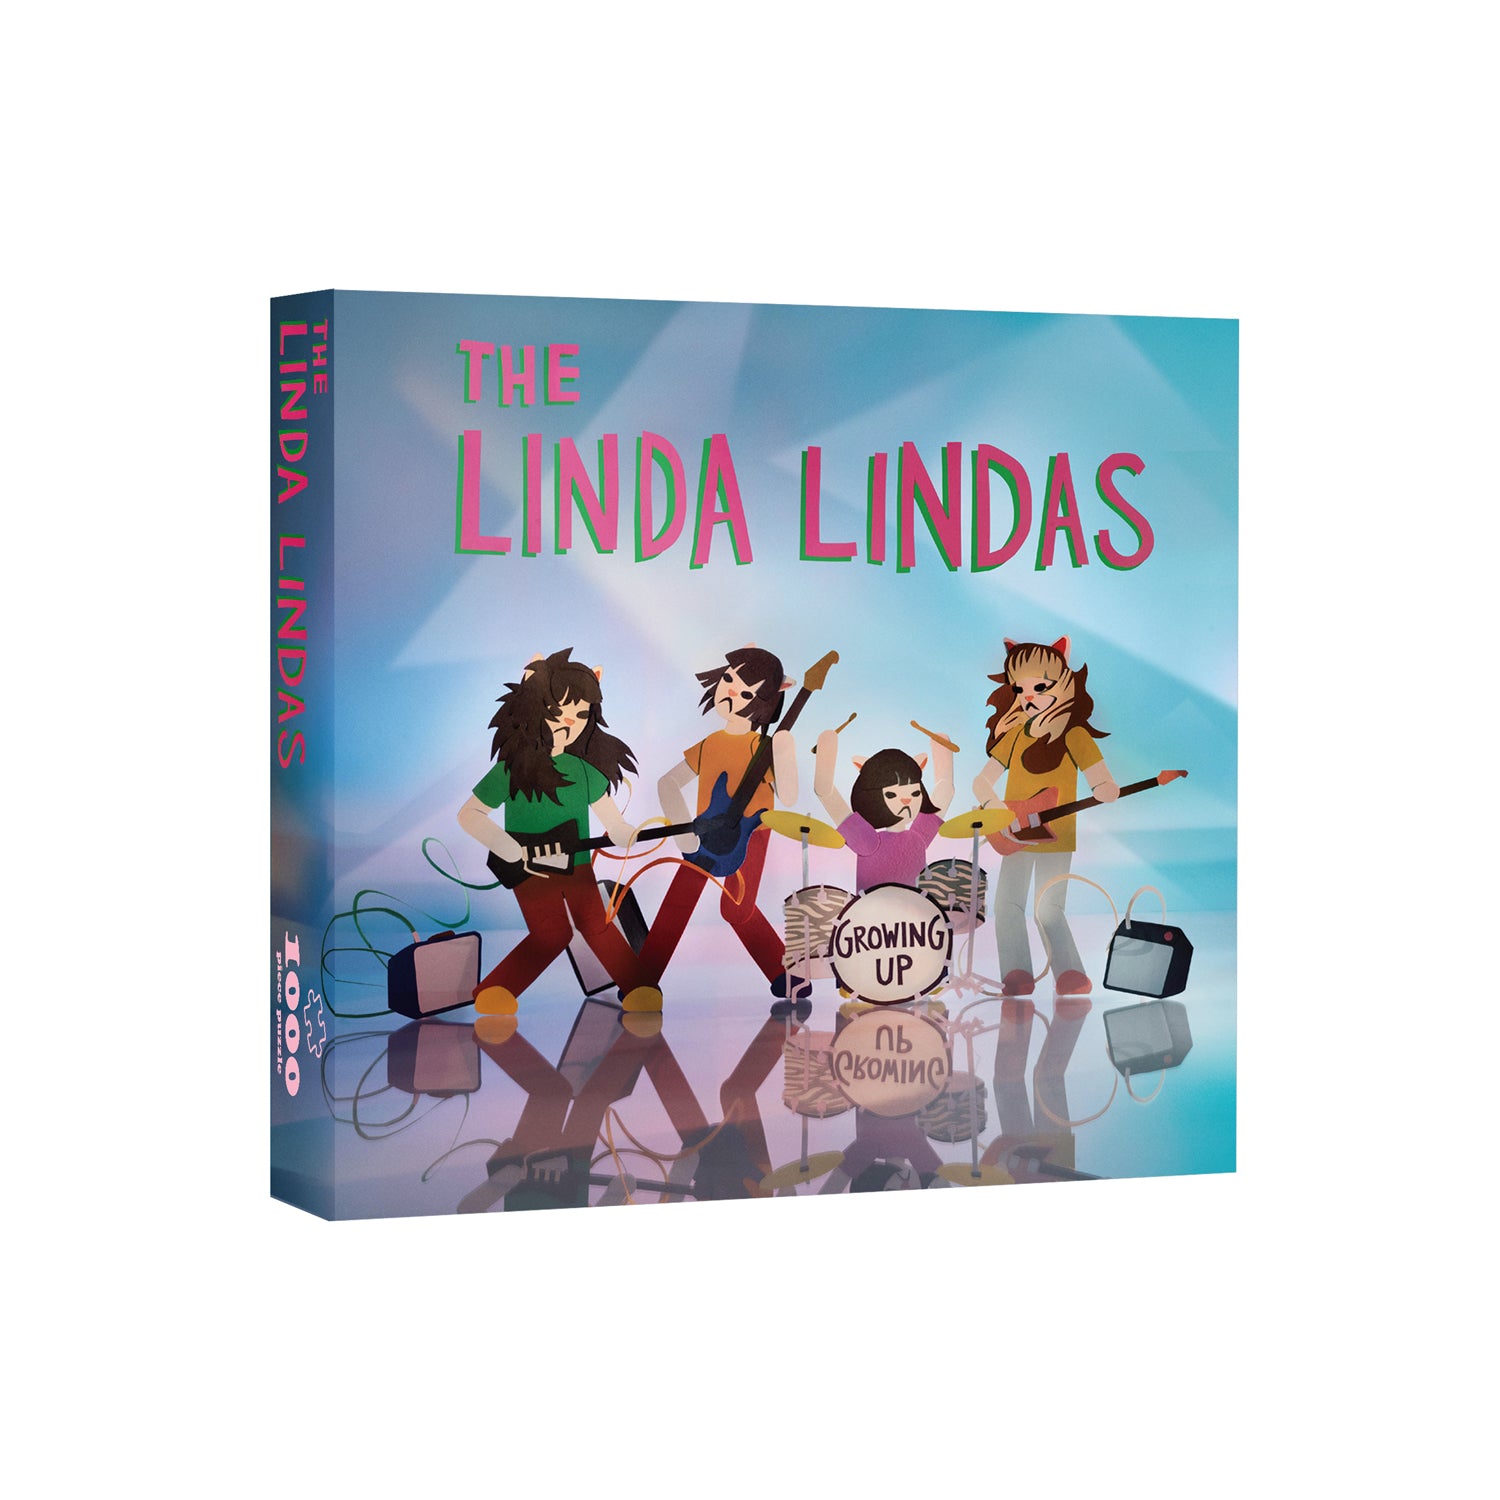 Image of a puzzle box against a white background. In a red/pink text with a green outline reads "the linda lindas". Below that is an image of 4 colorful cartoon characters representing the linda lindas playing guitar, bass, and drums. in black text, The bass drum says growing up. The background on the puzzle box is a mix of blue, purple, and green. On the side of the poster box, it says the linda lindas, 1000 piece.